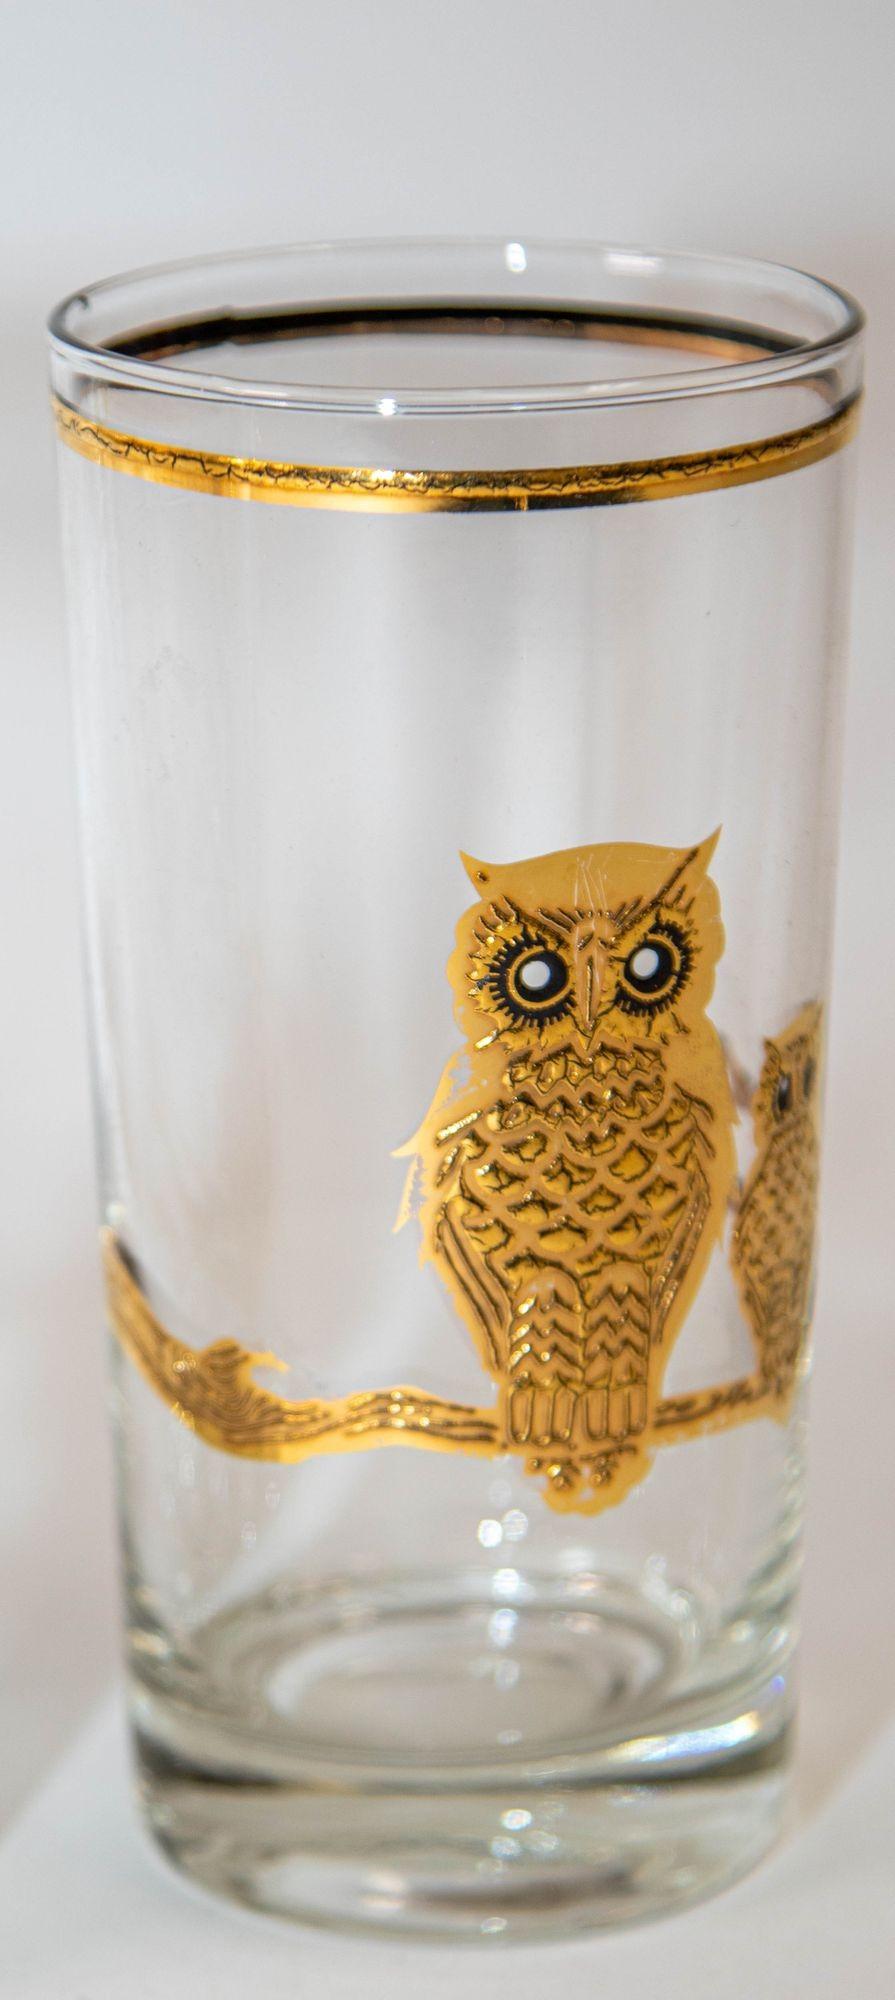 1950's Vintage Culver Ltd Highball Drinking Glasses with 22K Gold Owls Set of 6 For Sale 4